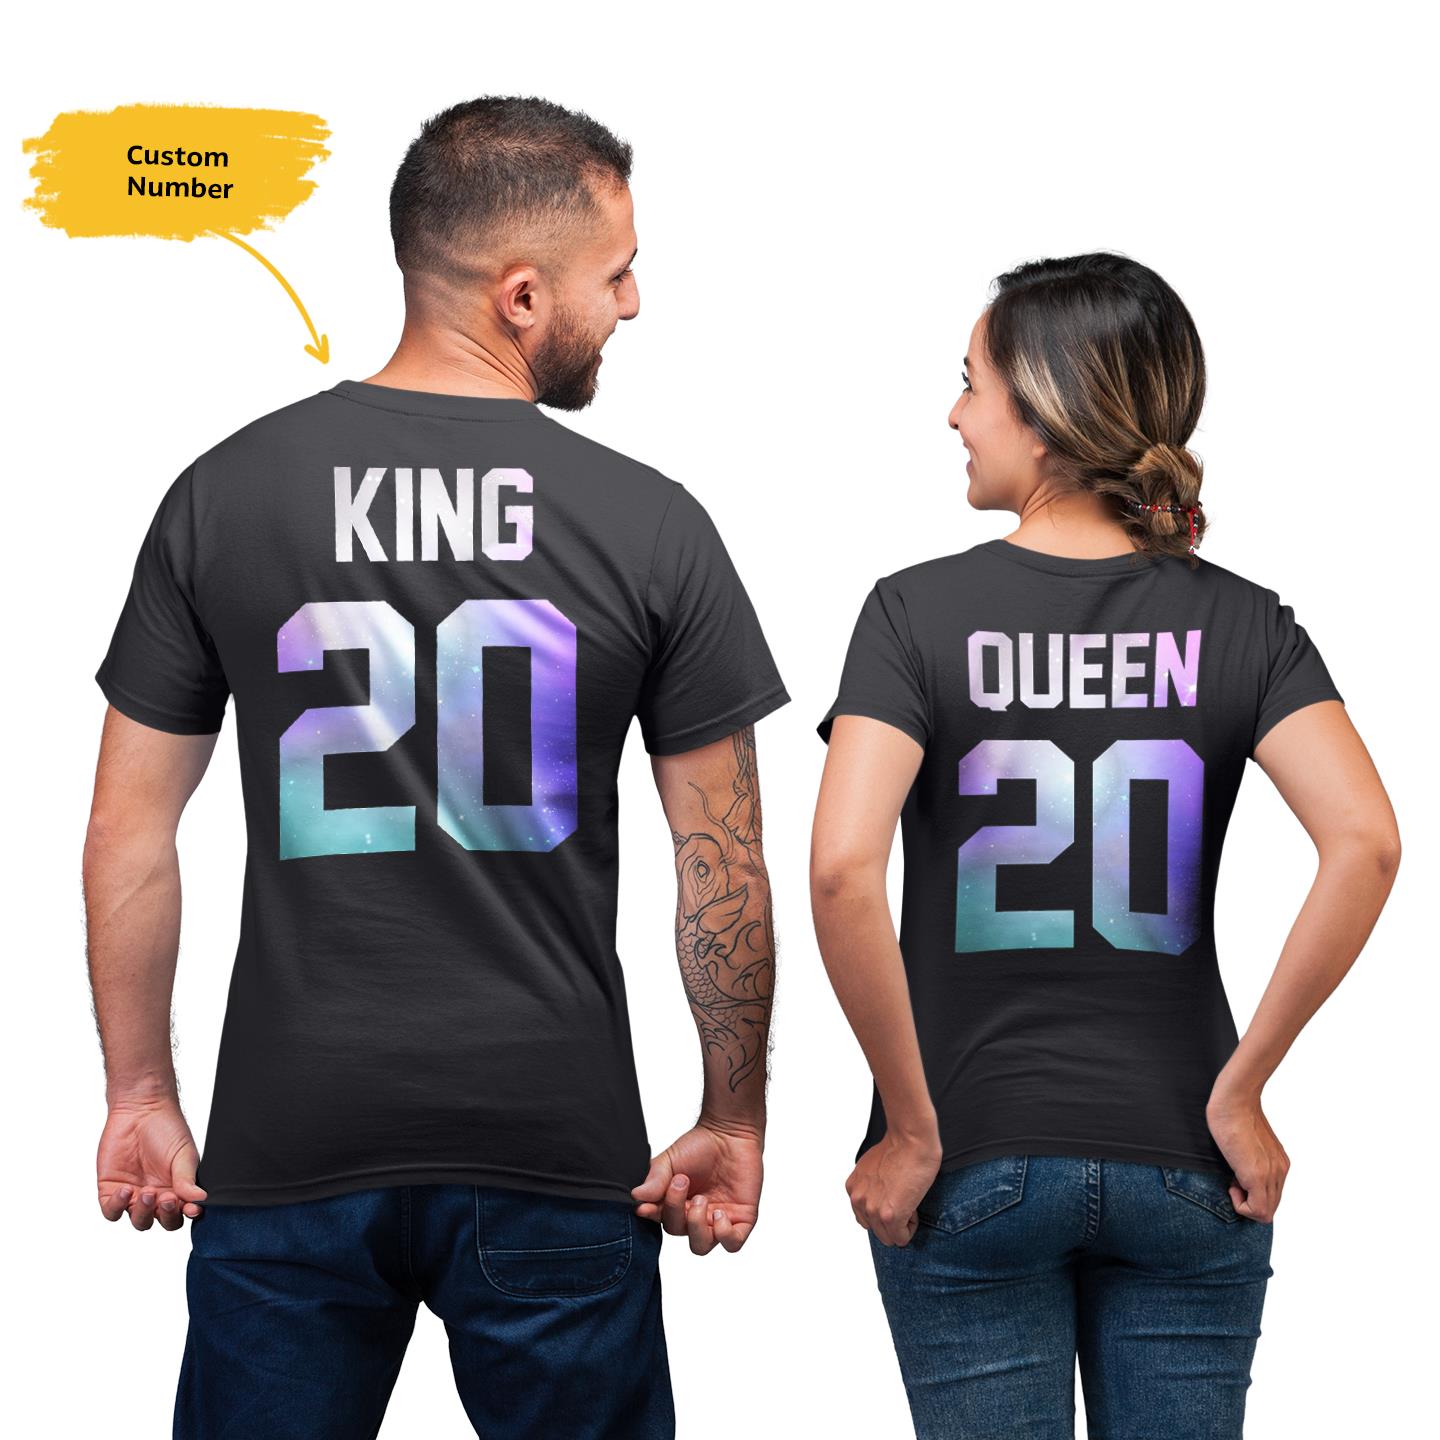 Personalized King and Queen Custom Number For Lovely Couple Matching T-Shirt